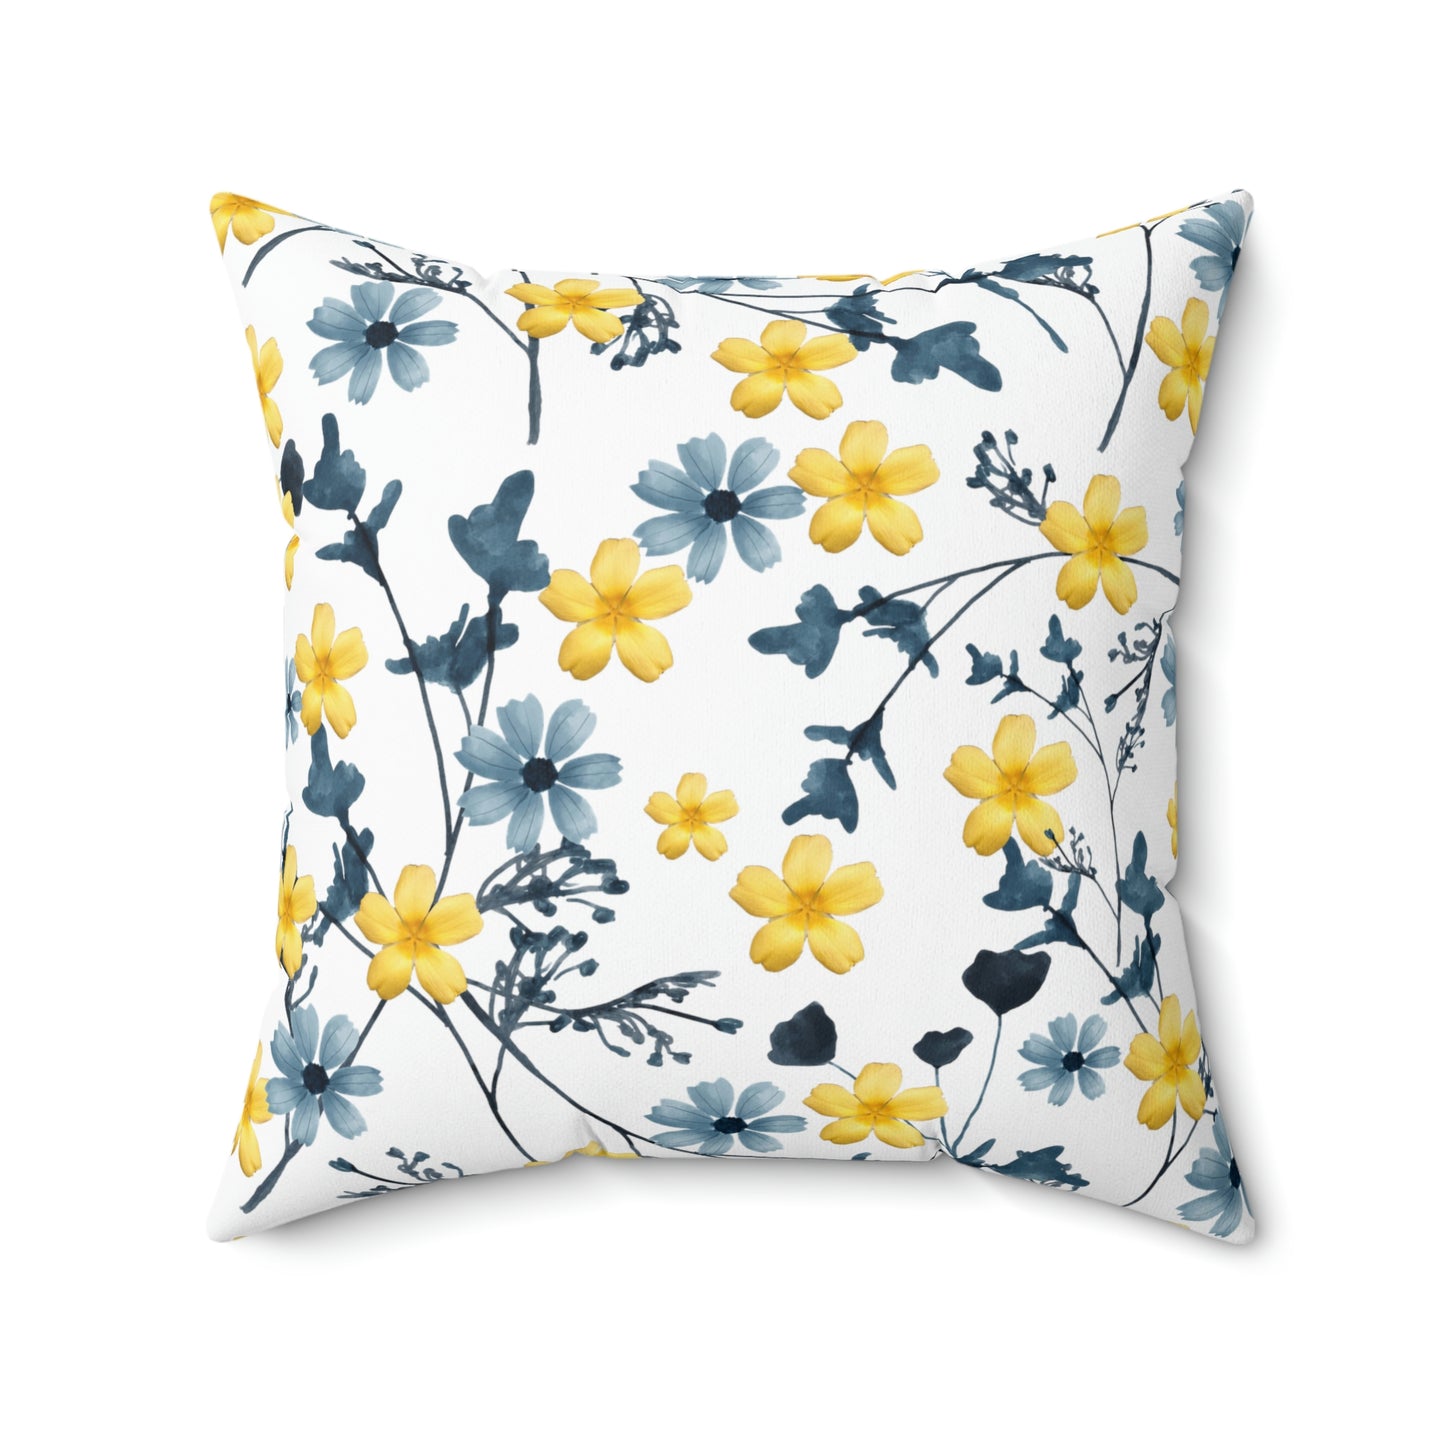 Spring Pillow, Yellow Pillow, Summer Cushion, Floral Pillow, Housewarming Gift, Blue Floral Cushion, Blue and Yellow Home Decor,